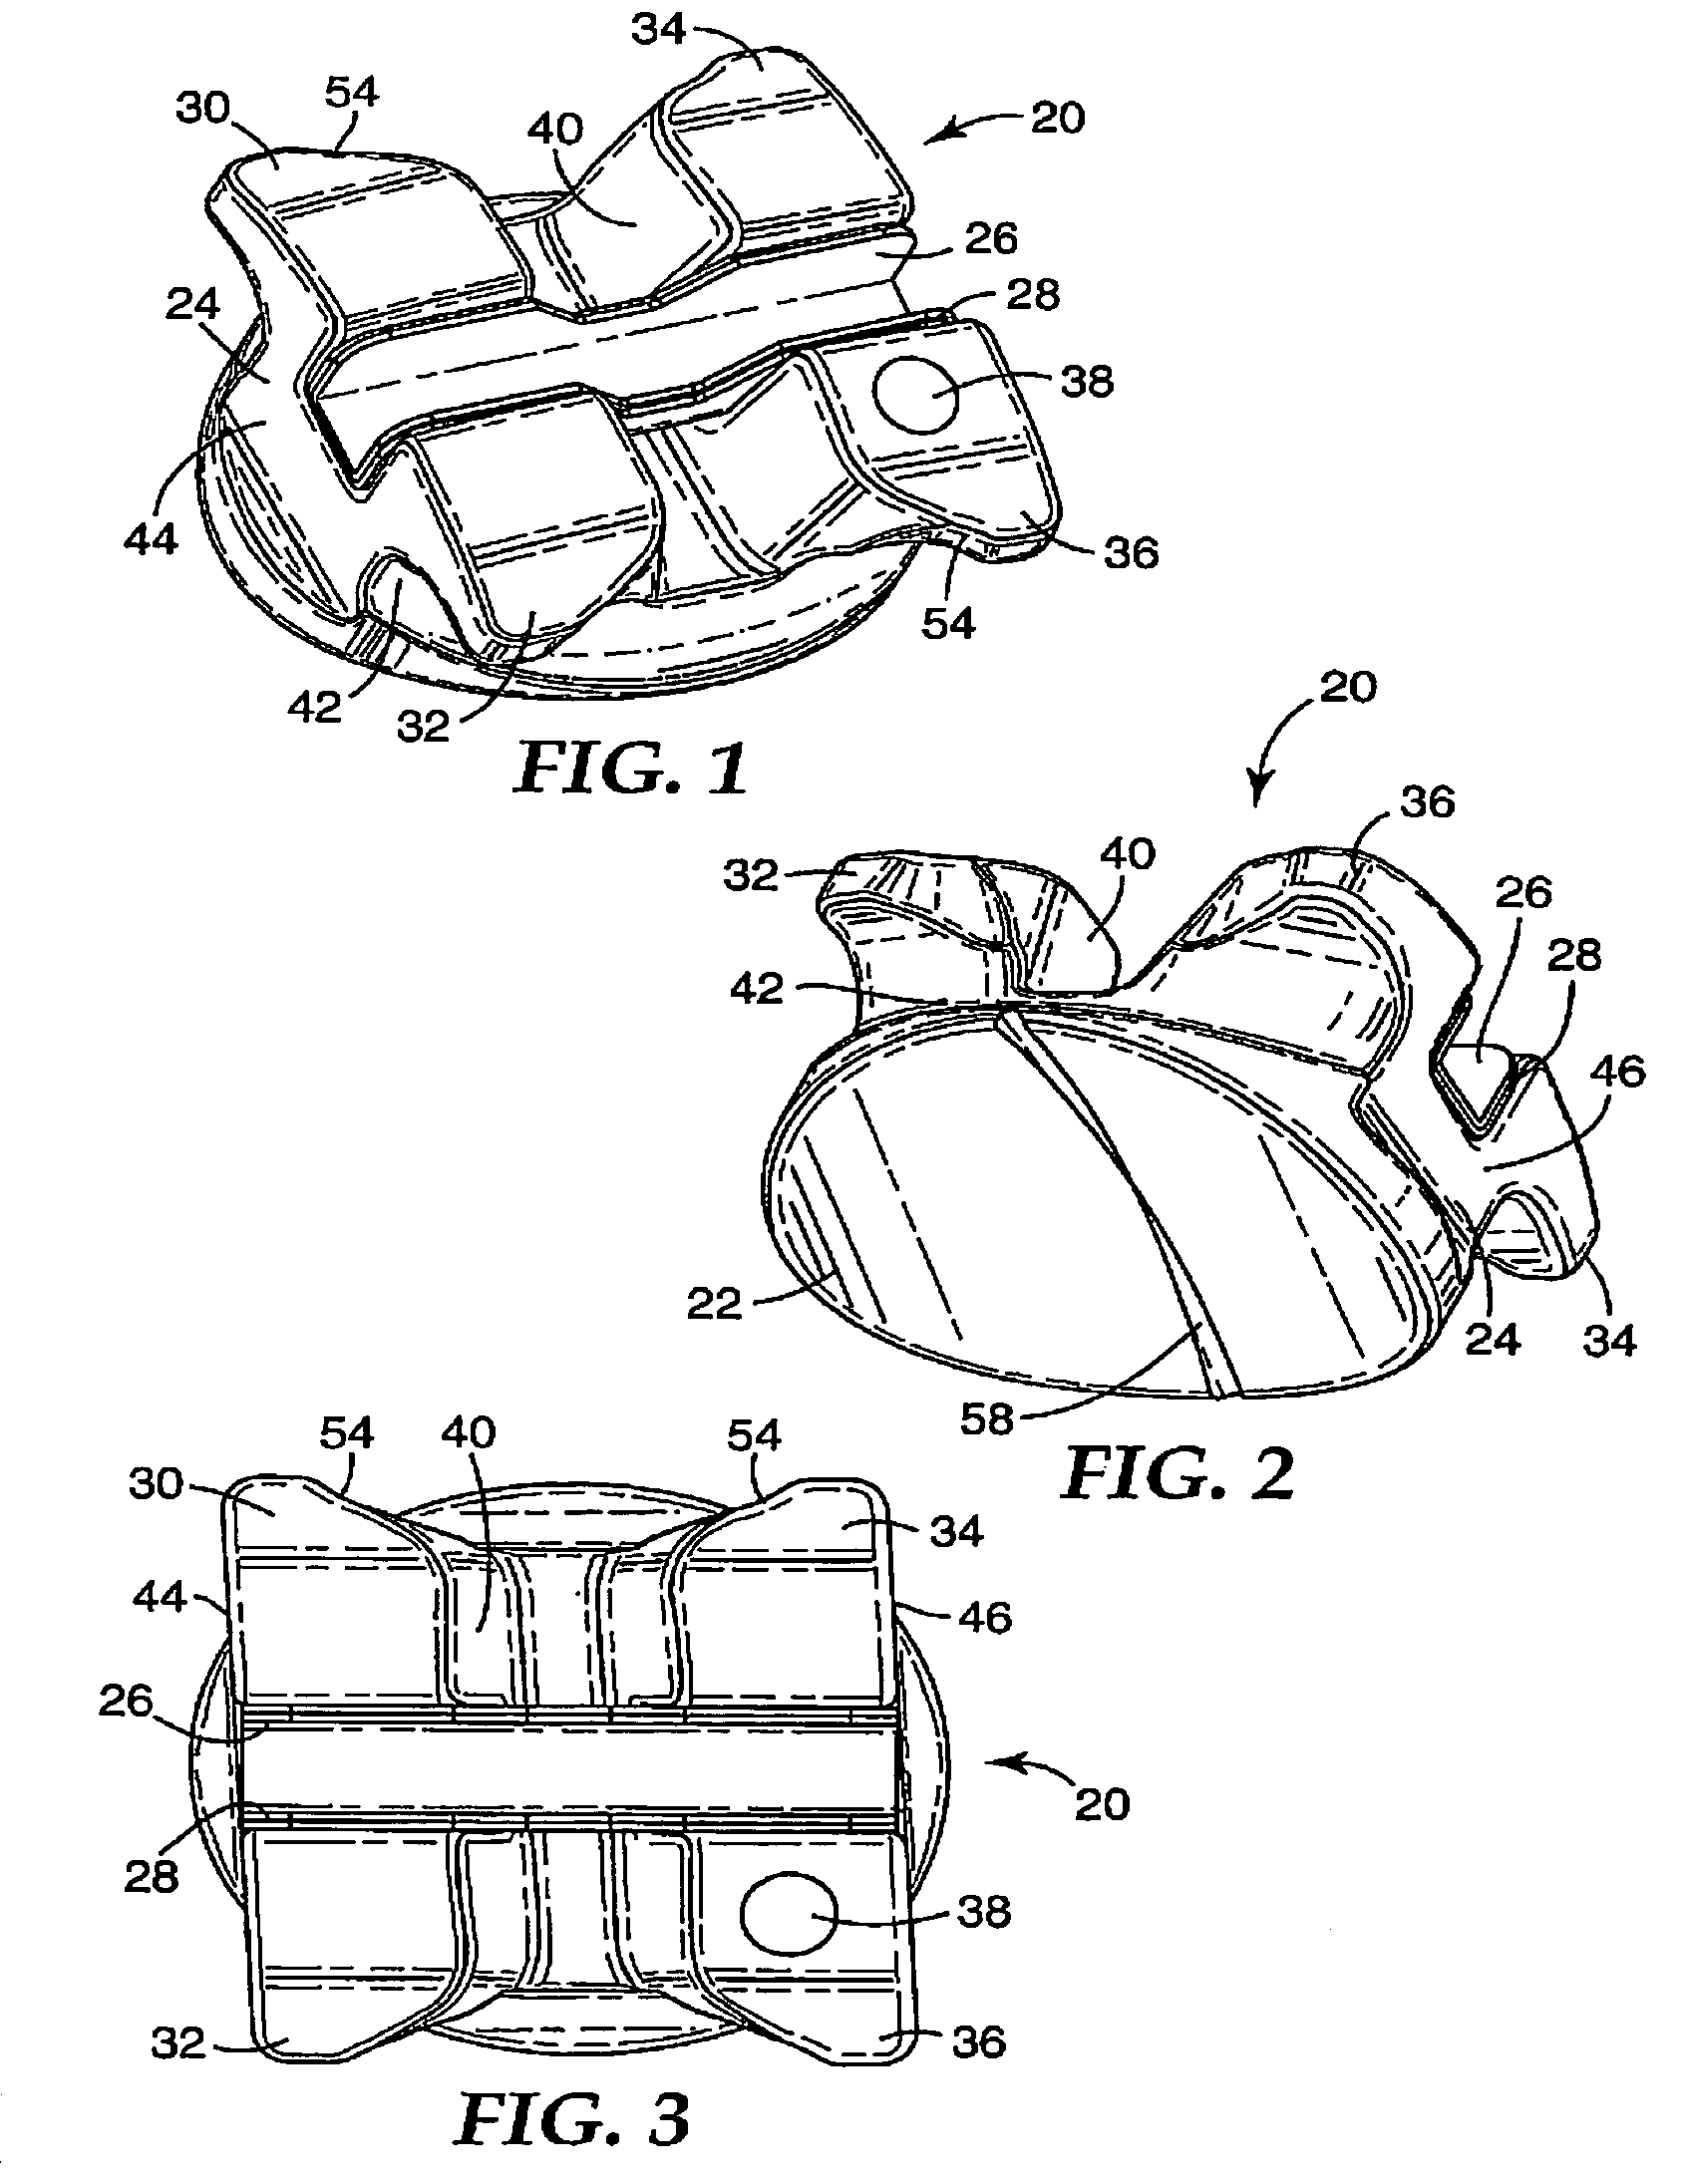 Orthodontic bracket with reinforced tiewings